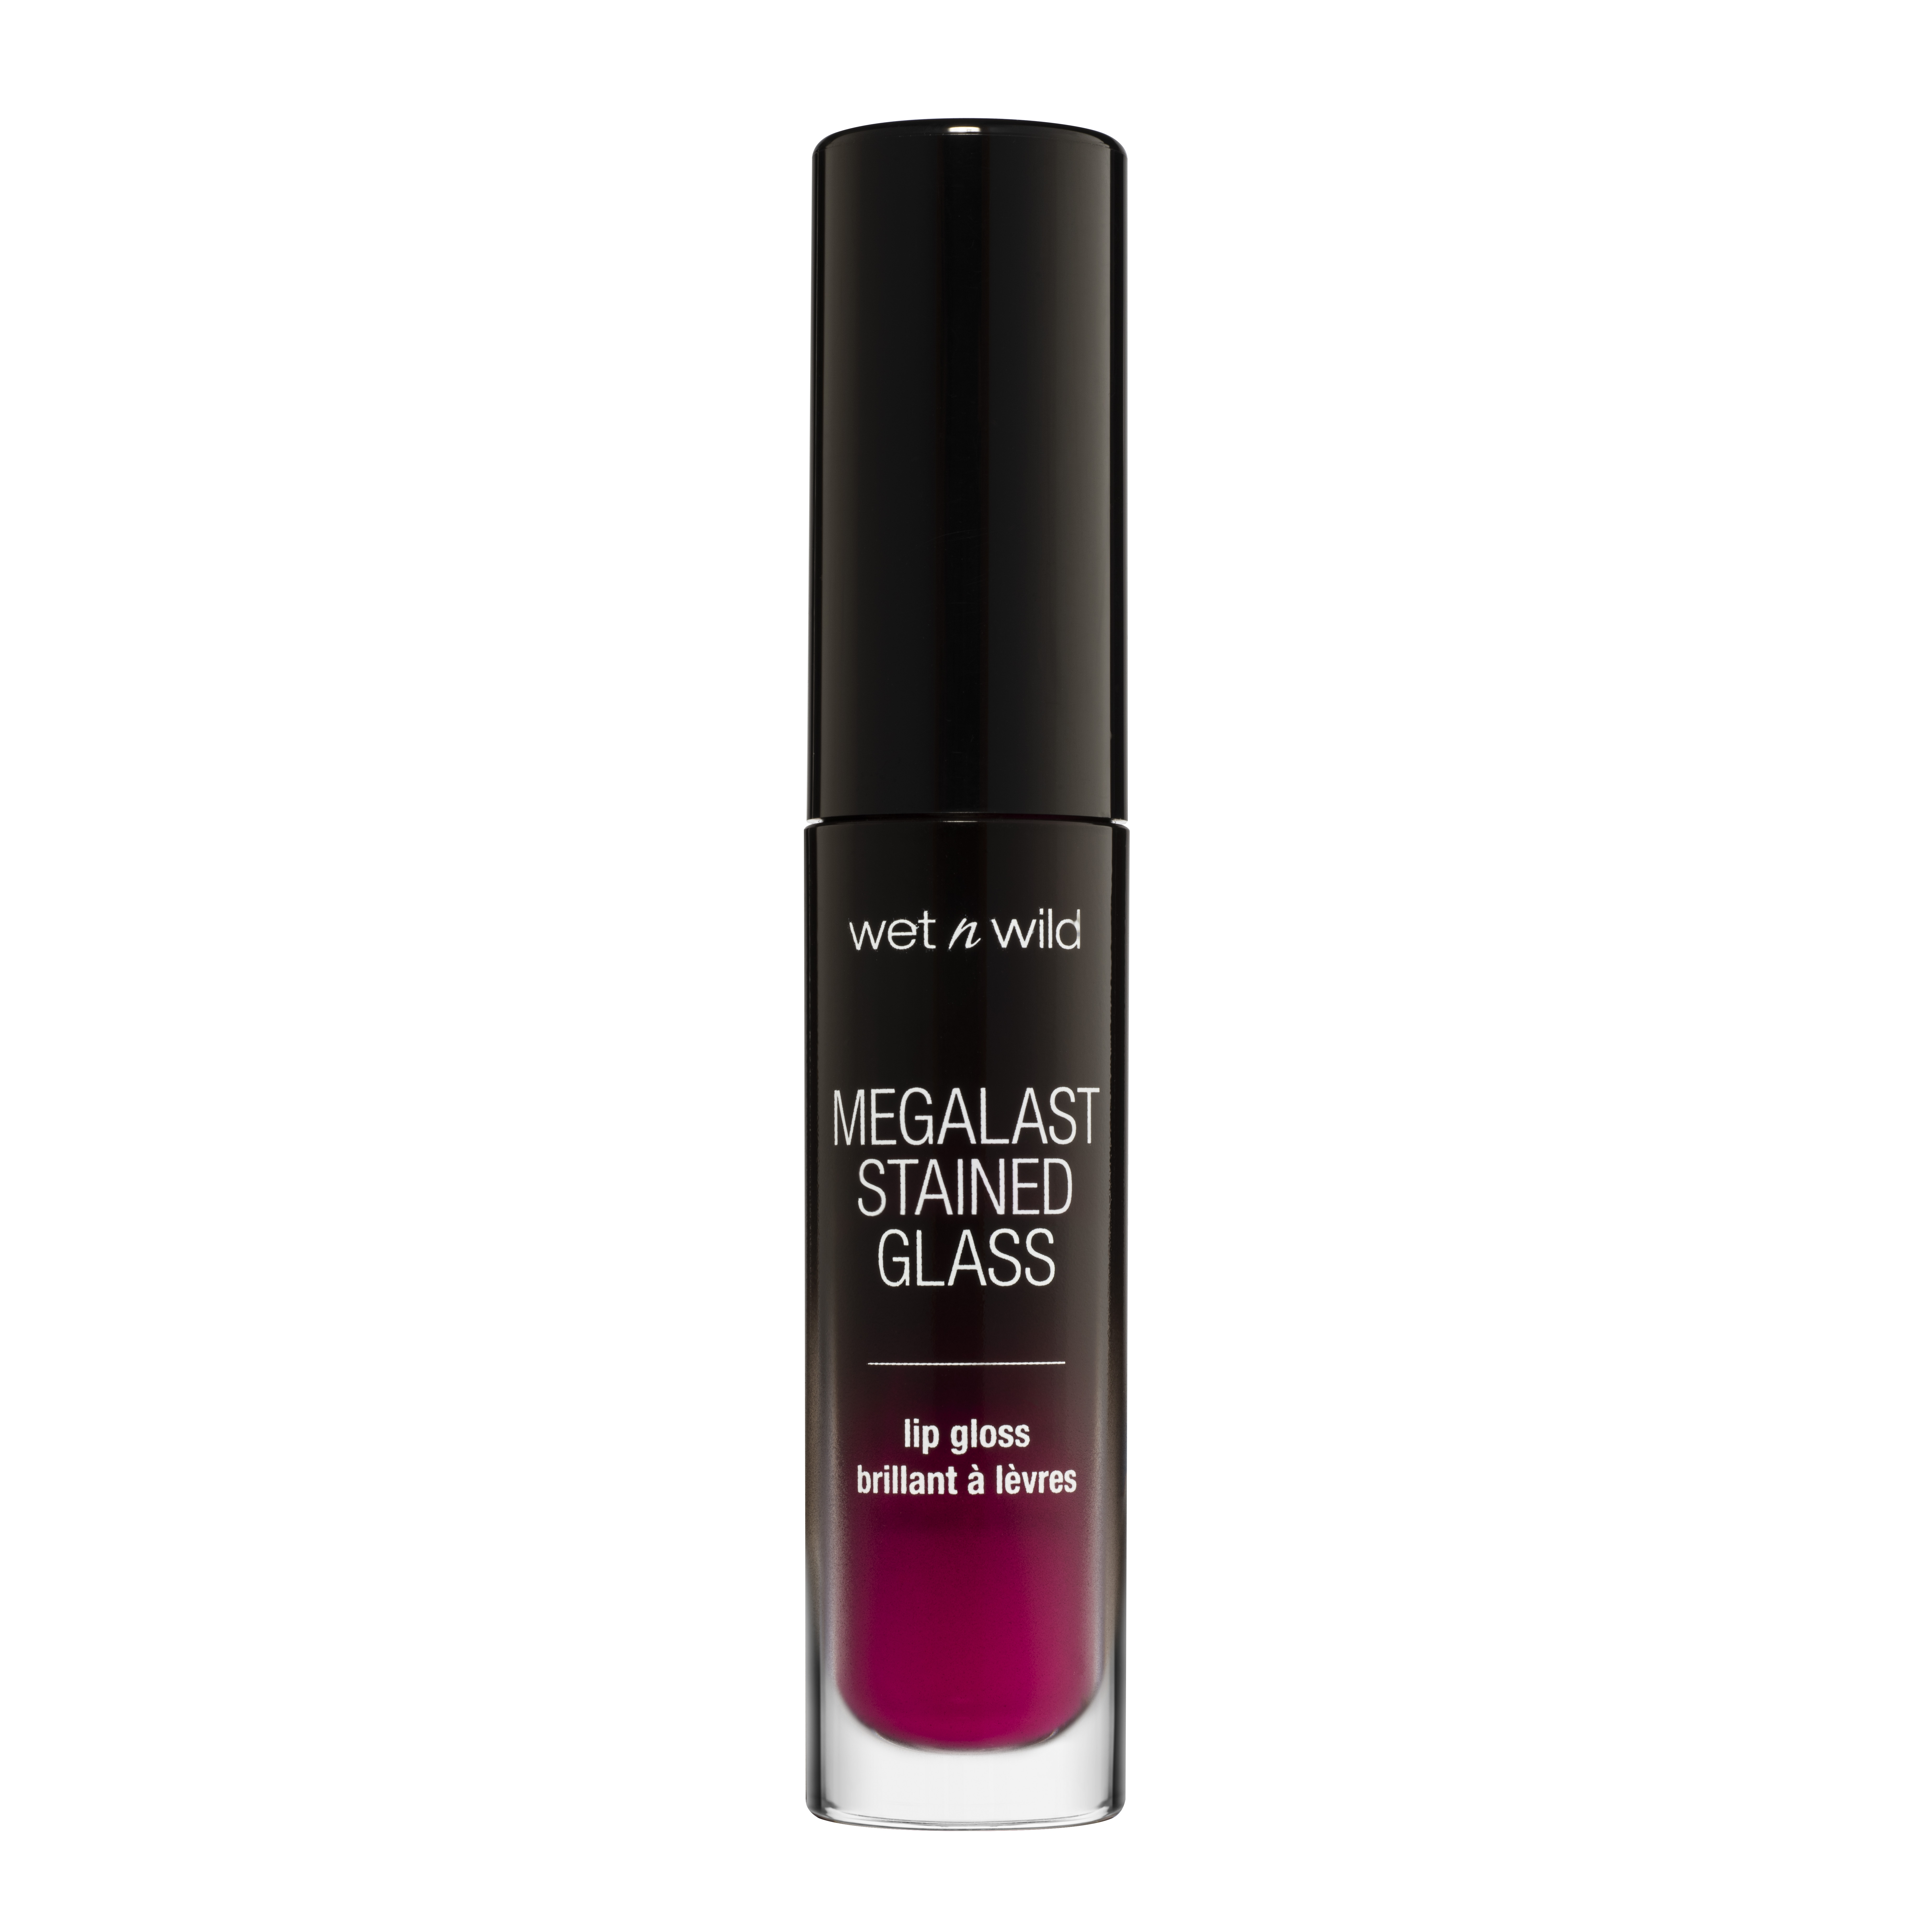 Wet n Wild Megalast Stained Glass Lip Gloss